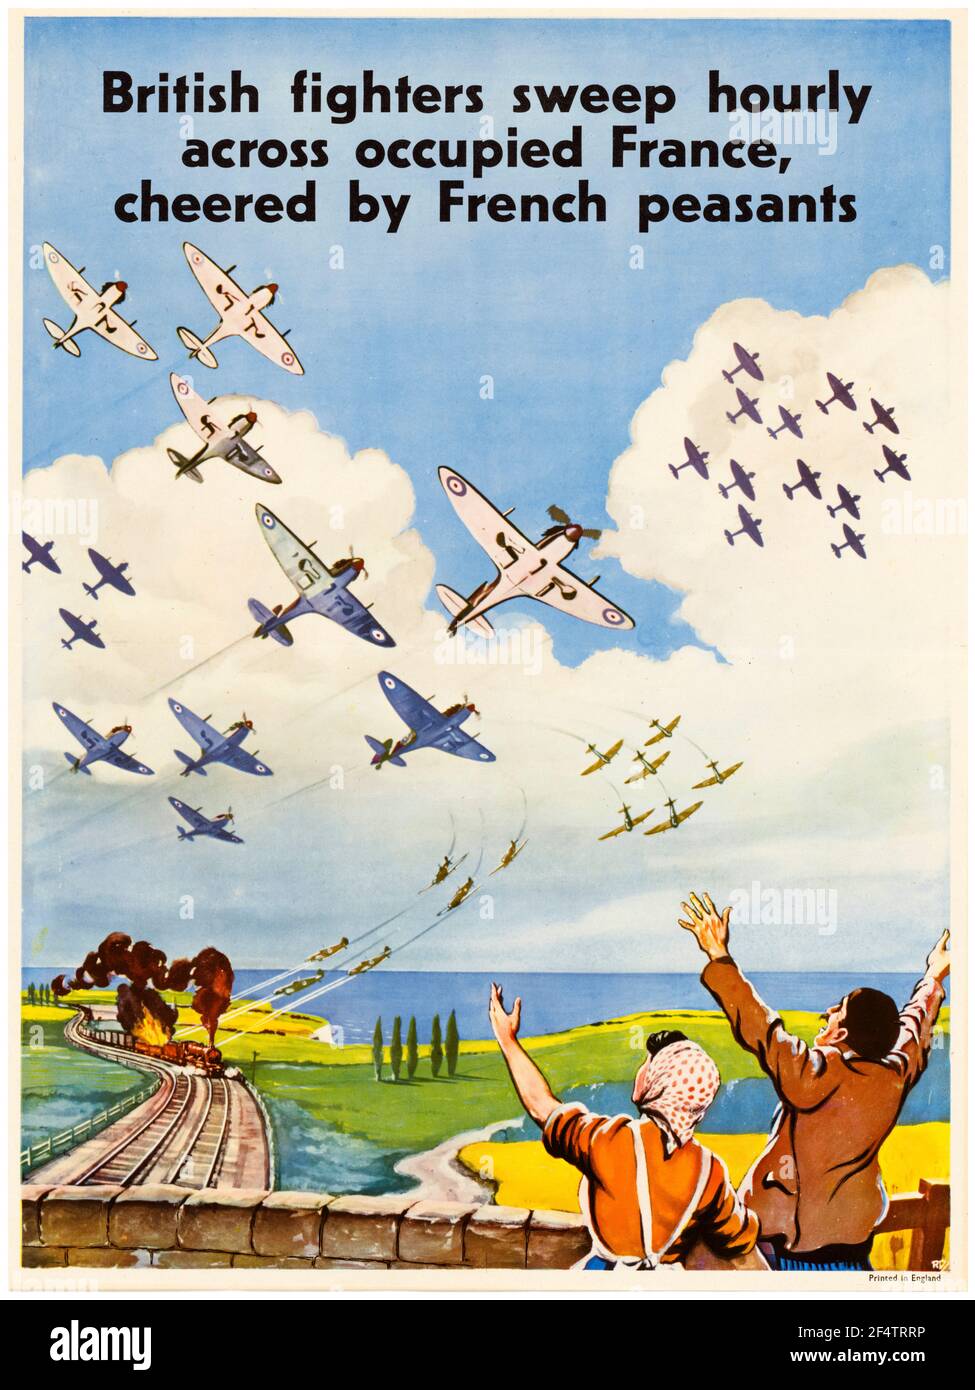 WW2, British RAF Fighters Sweep Hourly Across Occupied France Cheered by French Peasants, (RAF fighters attack a train), motivational poster, 1942-1945 Stock Photo